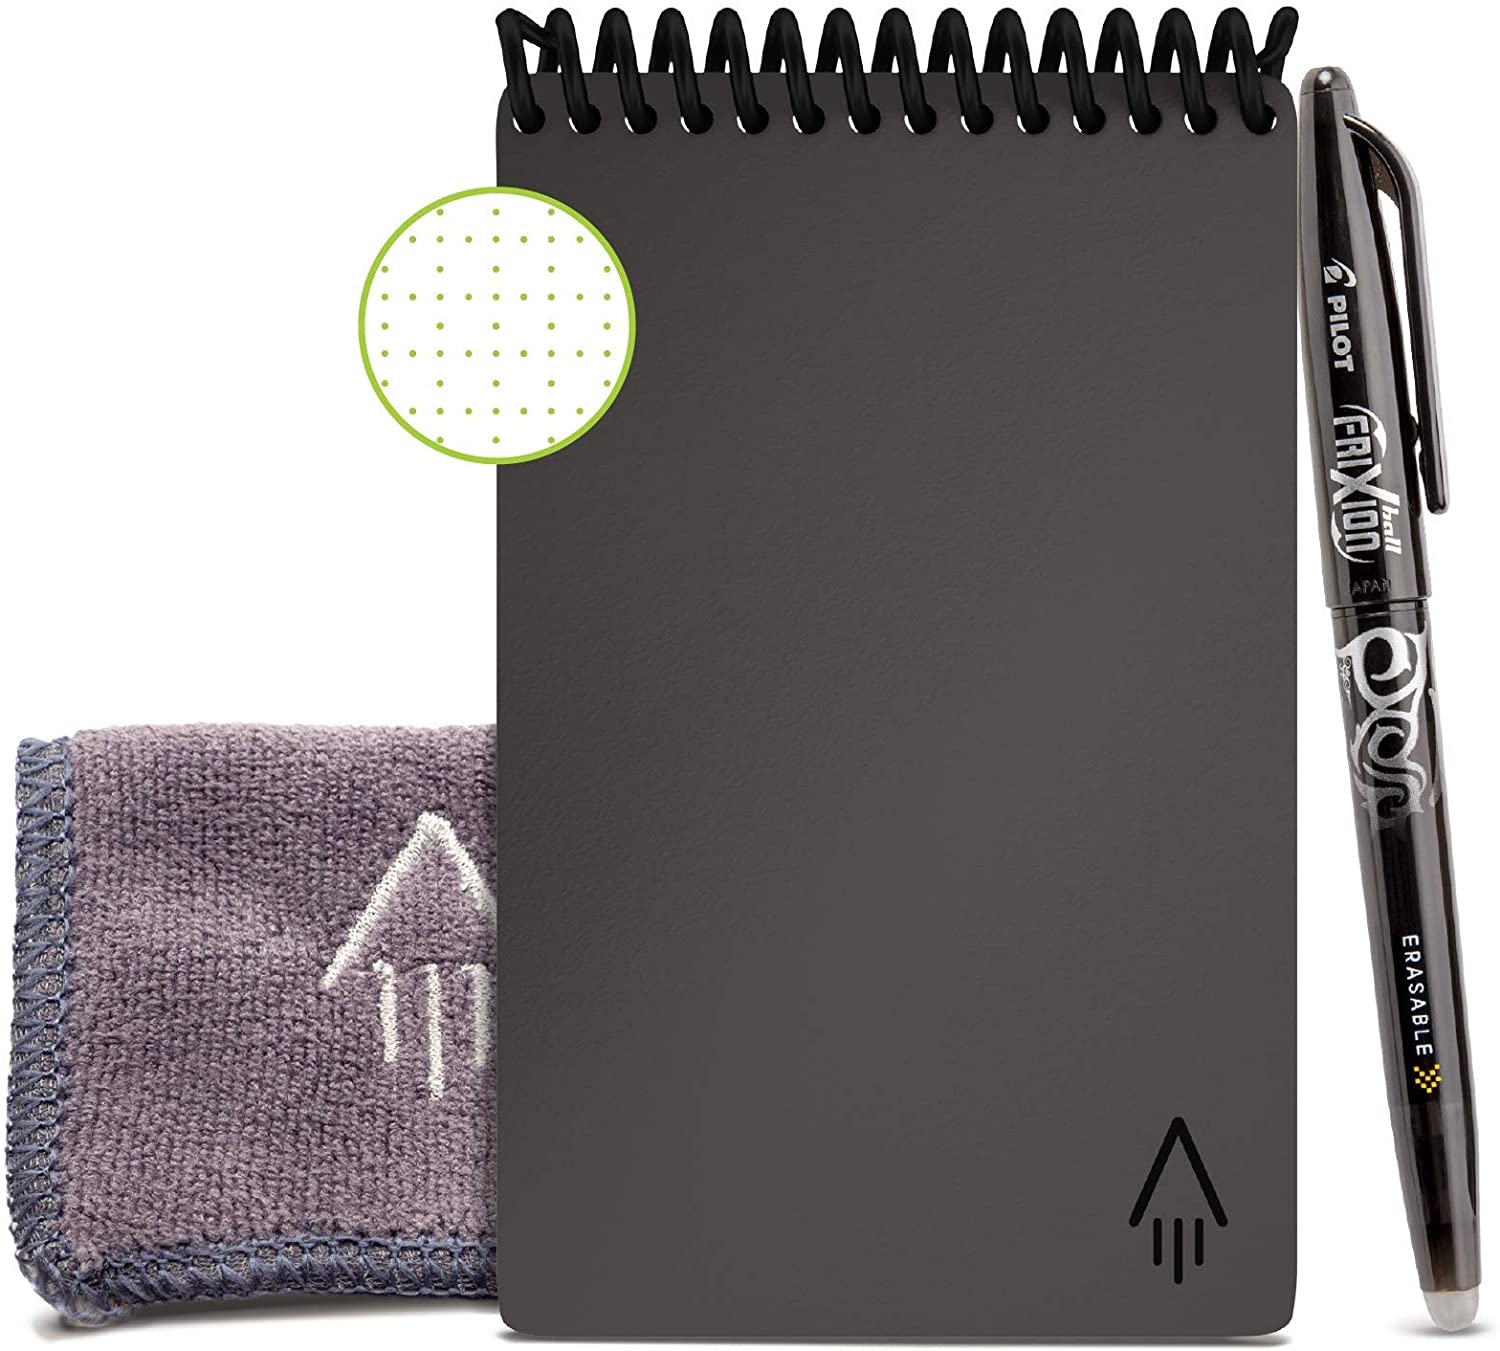 Rocketbook EVR-M-K-CIG Everlast Mini Smart Reusable Notebook with Pen and Microfiber Cloth, Space Gray